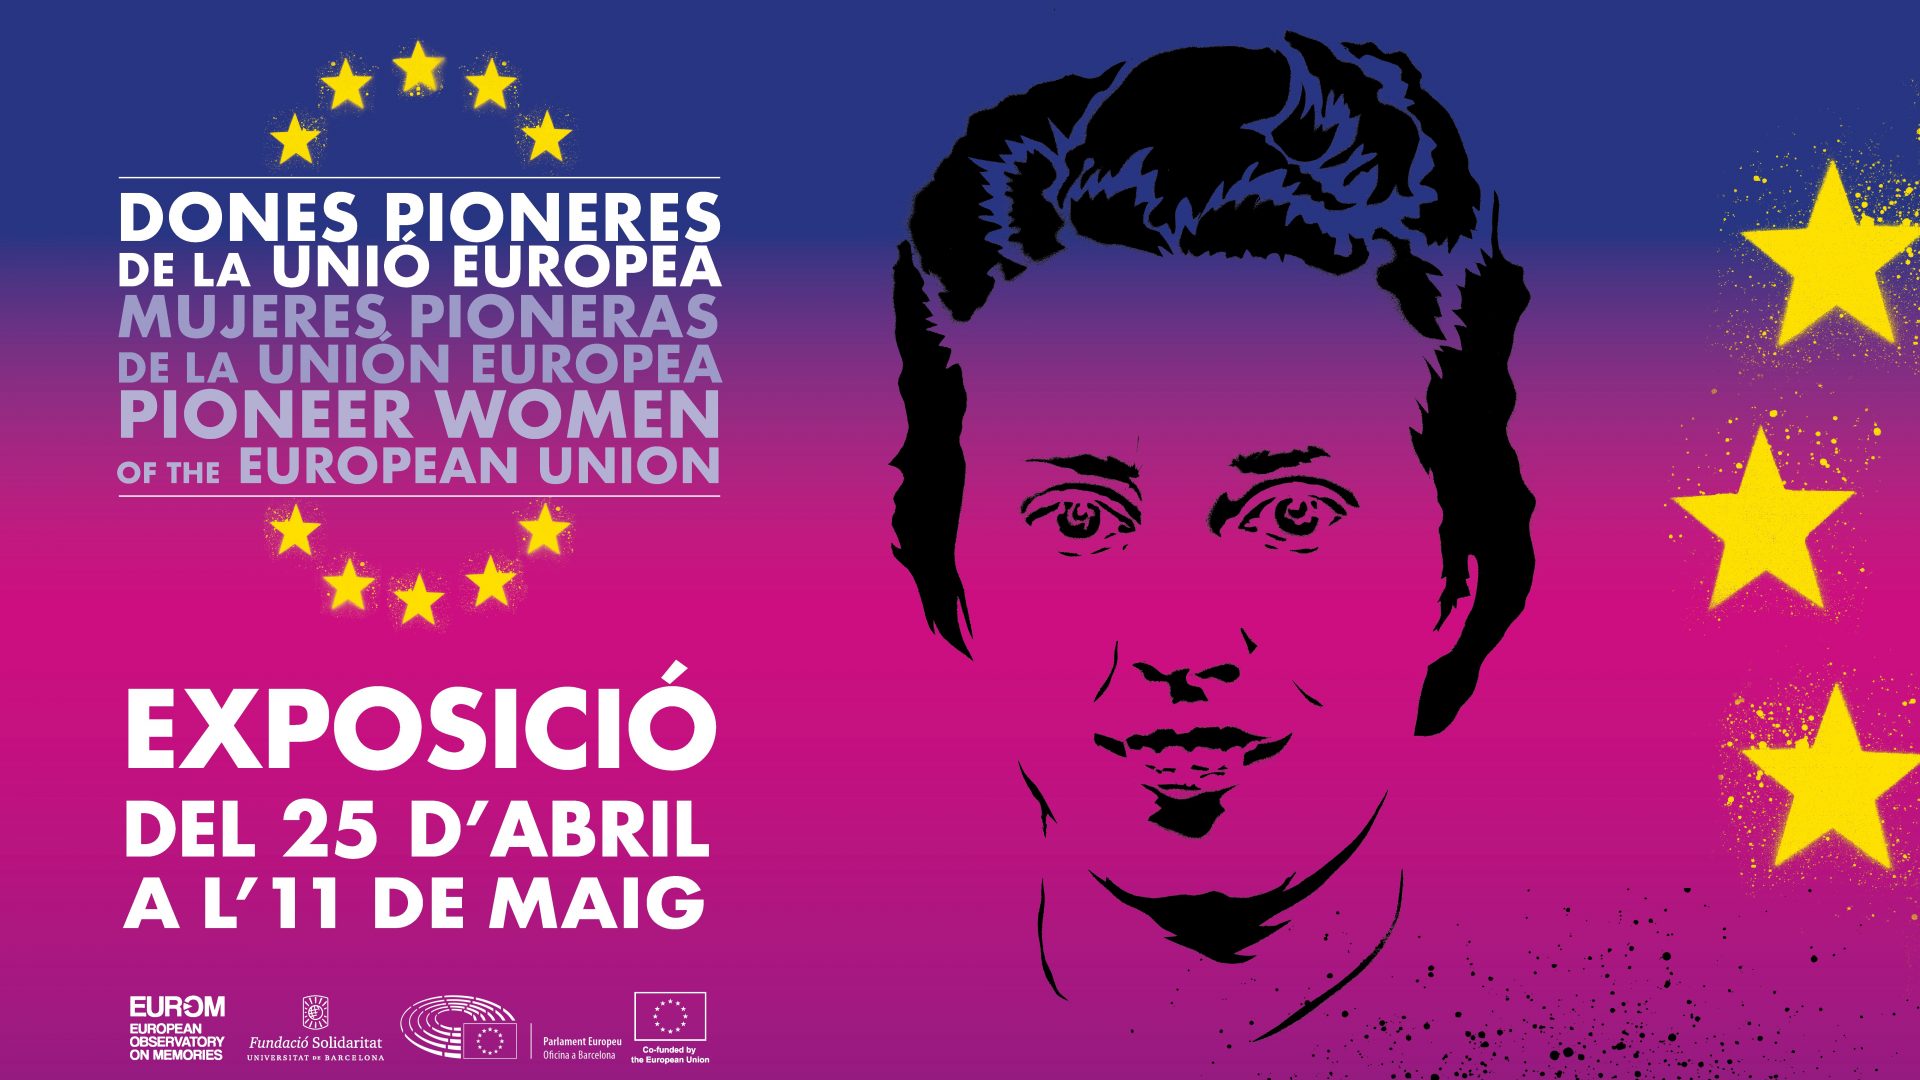 From today until 11 May, the hall of the Historical Building will host the portraits of seven women who inspired the European Union.